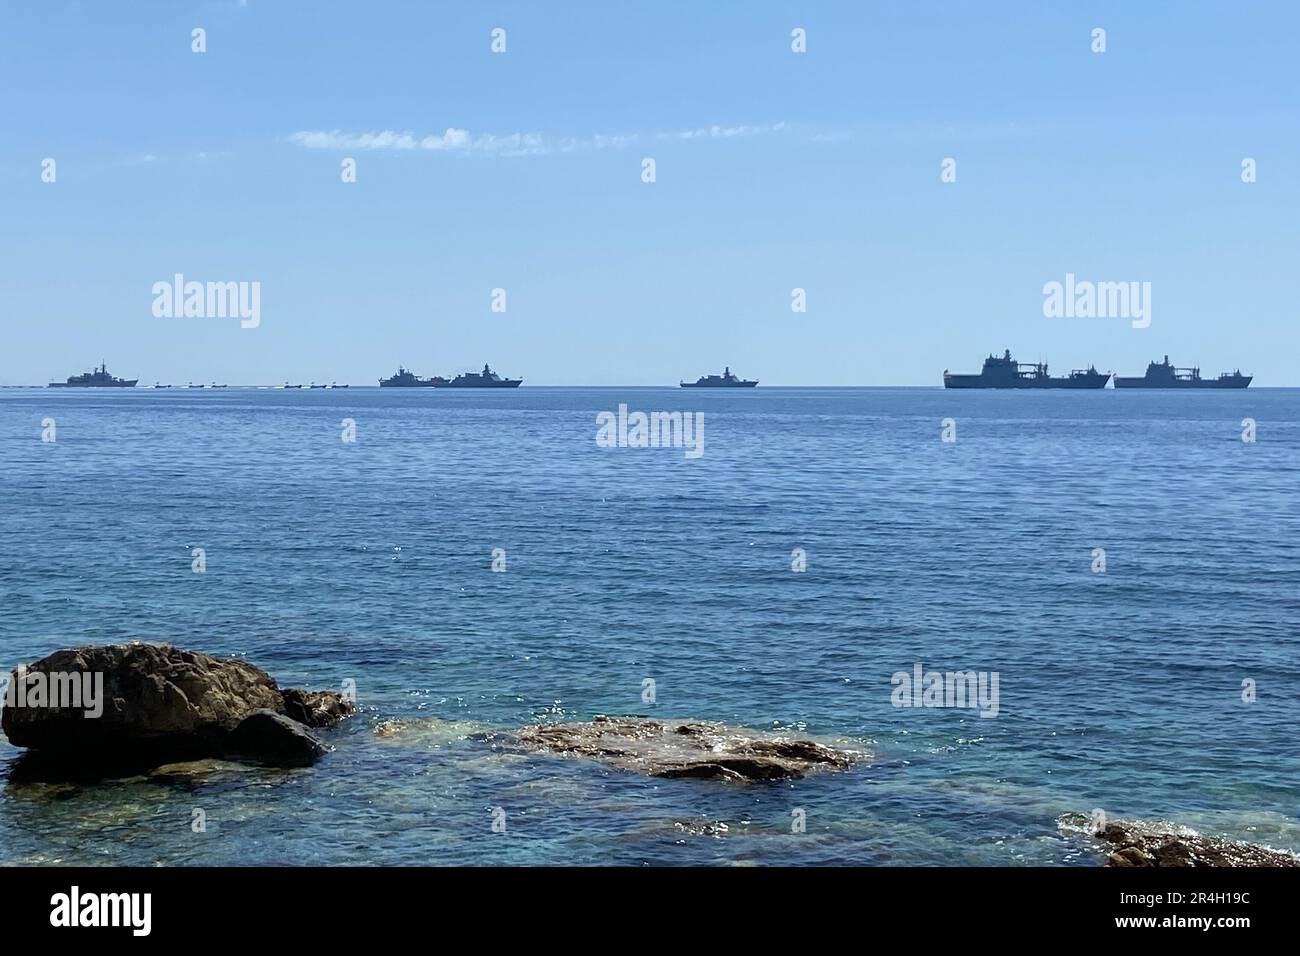 Navy activity on the Aegean Mediterranean Sea. Military vehicles ships transport for military drill operation in open sea with rocks on the seashore. Stock Photo